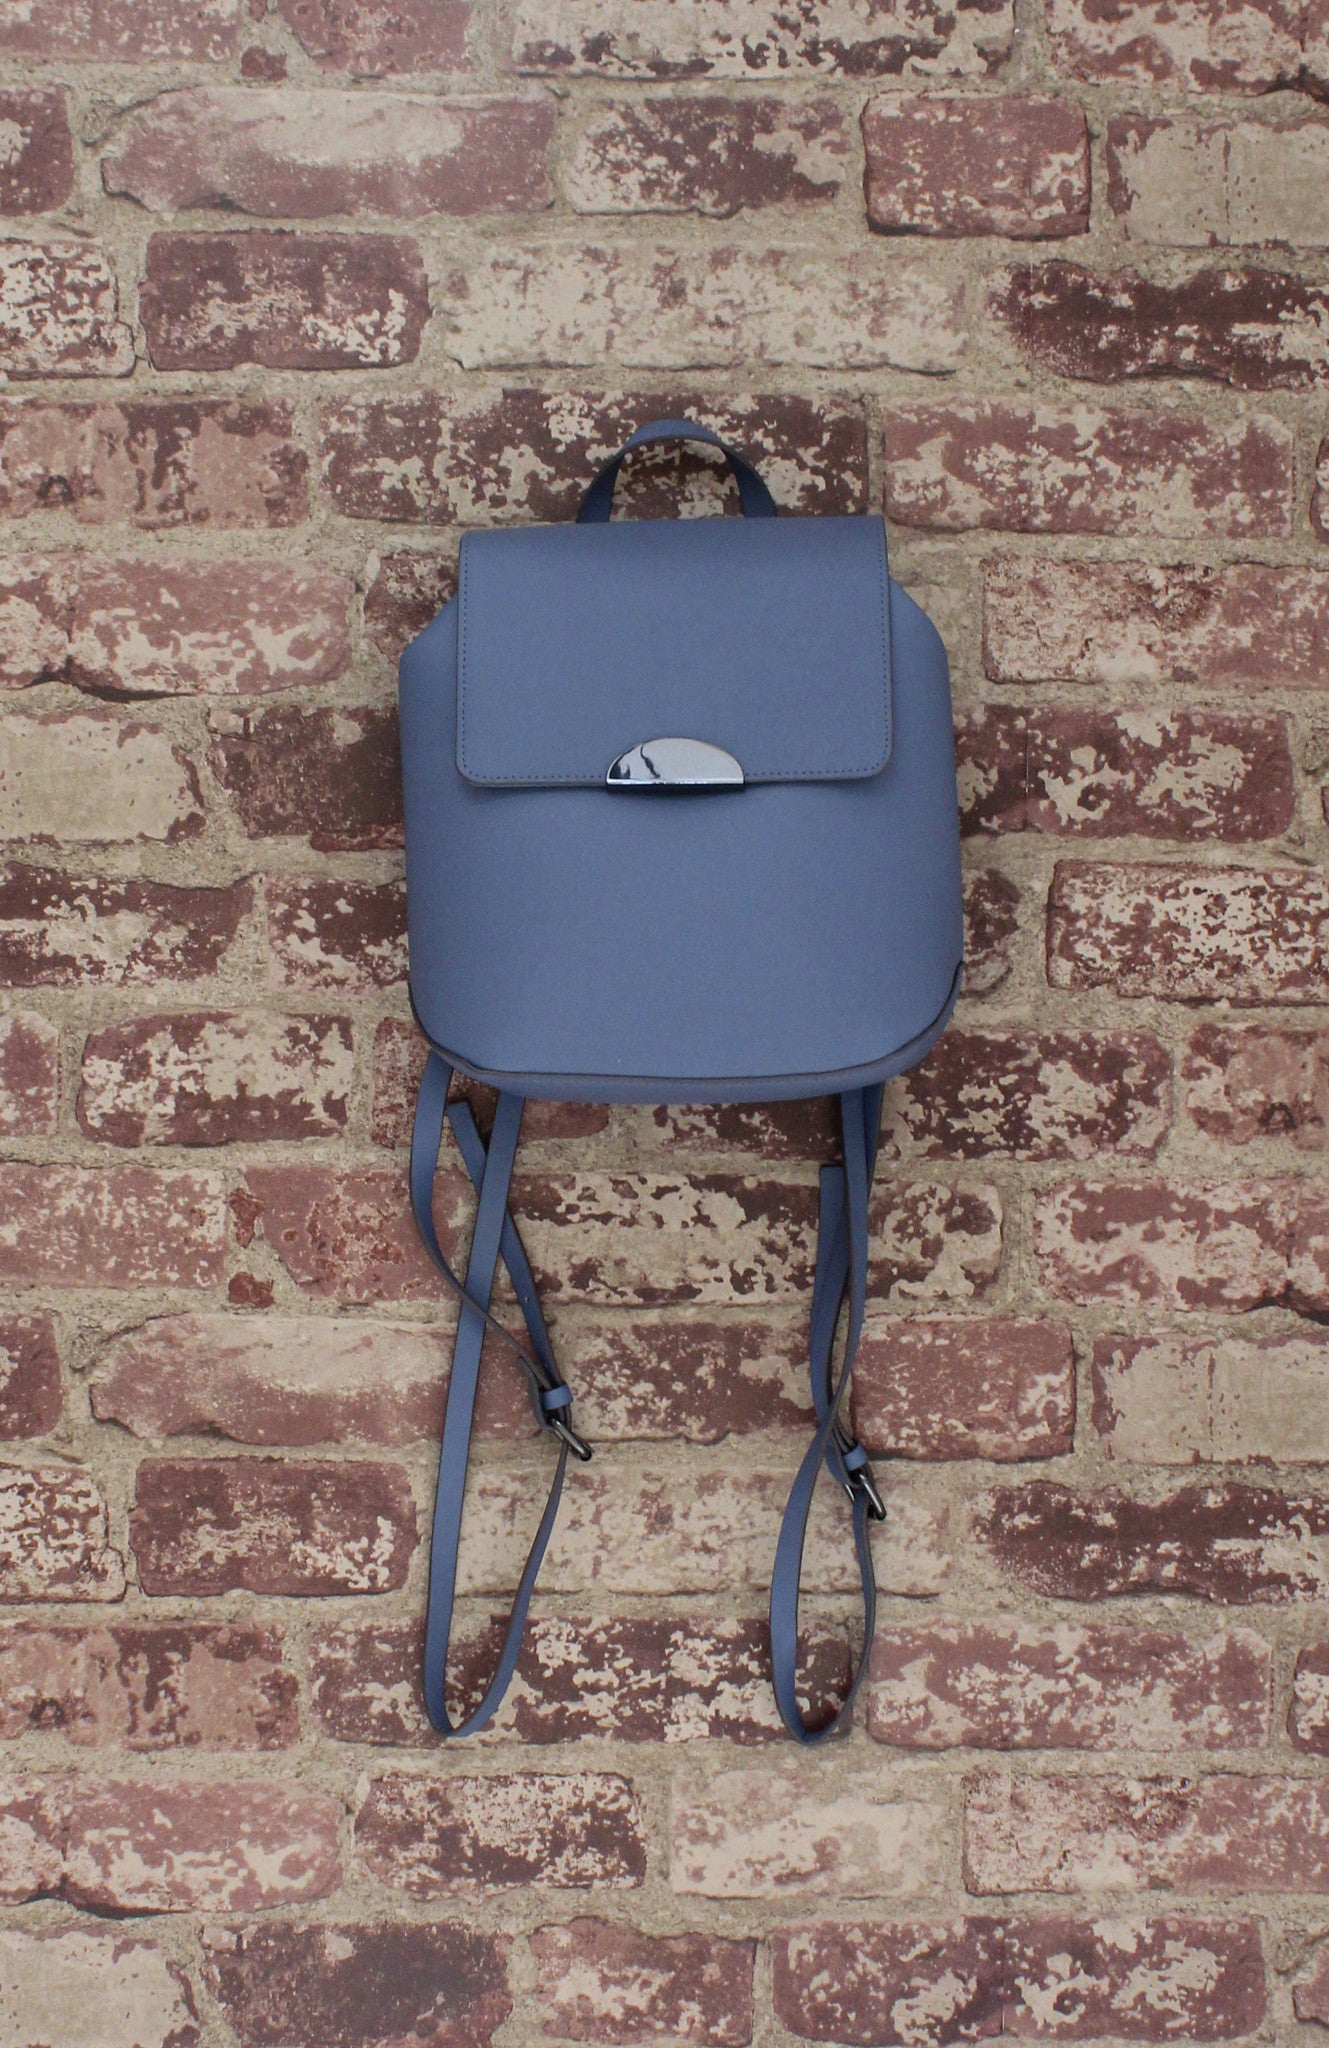 Flap Backpack In Blue